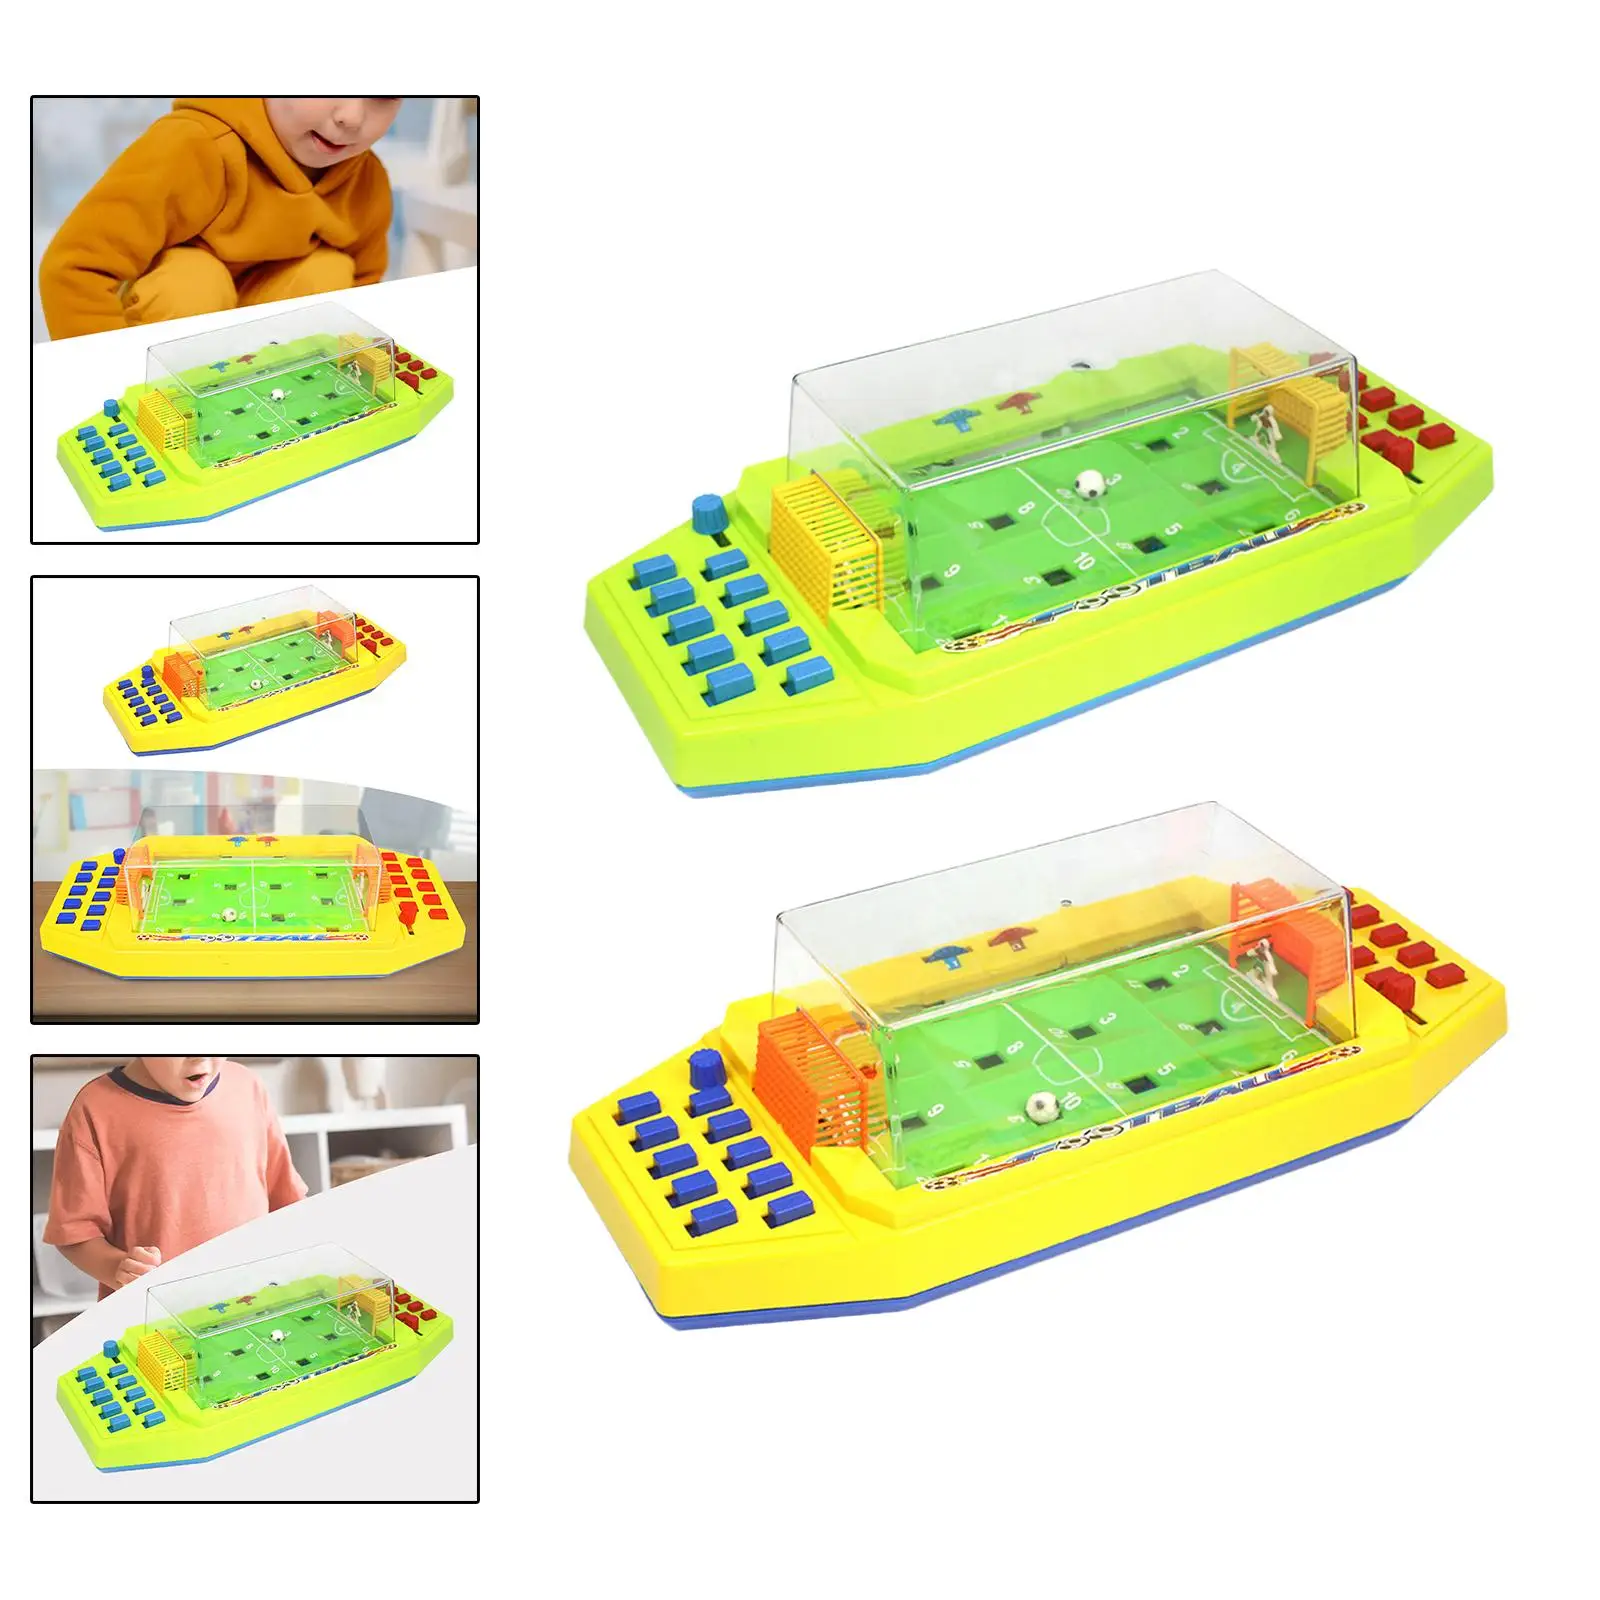 Football Board Game Hand Eye Coordination Soccer Tabletop Game Mini Tabletop Football Playroom Family Game Parties Entertainment